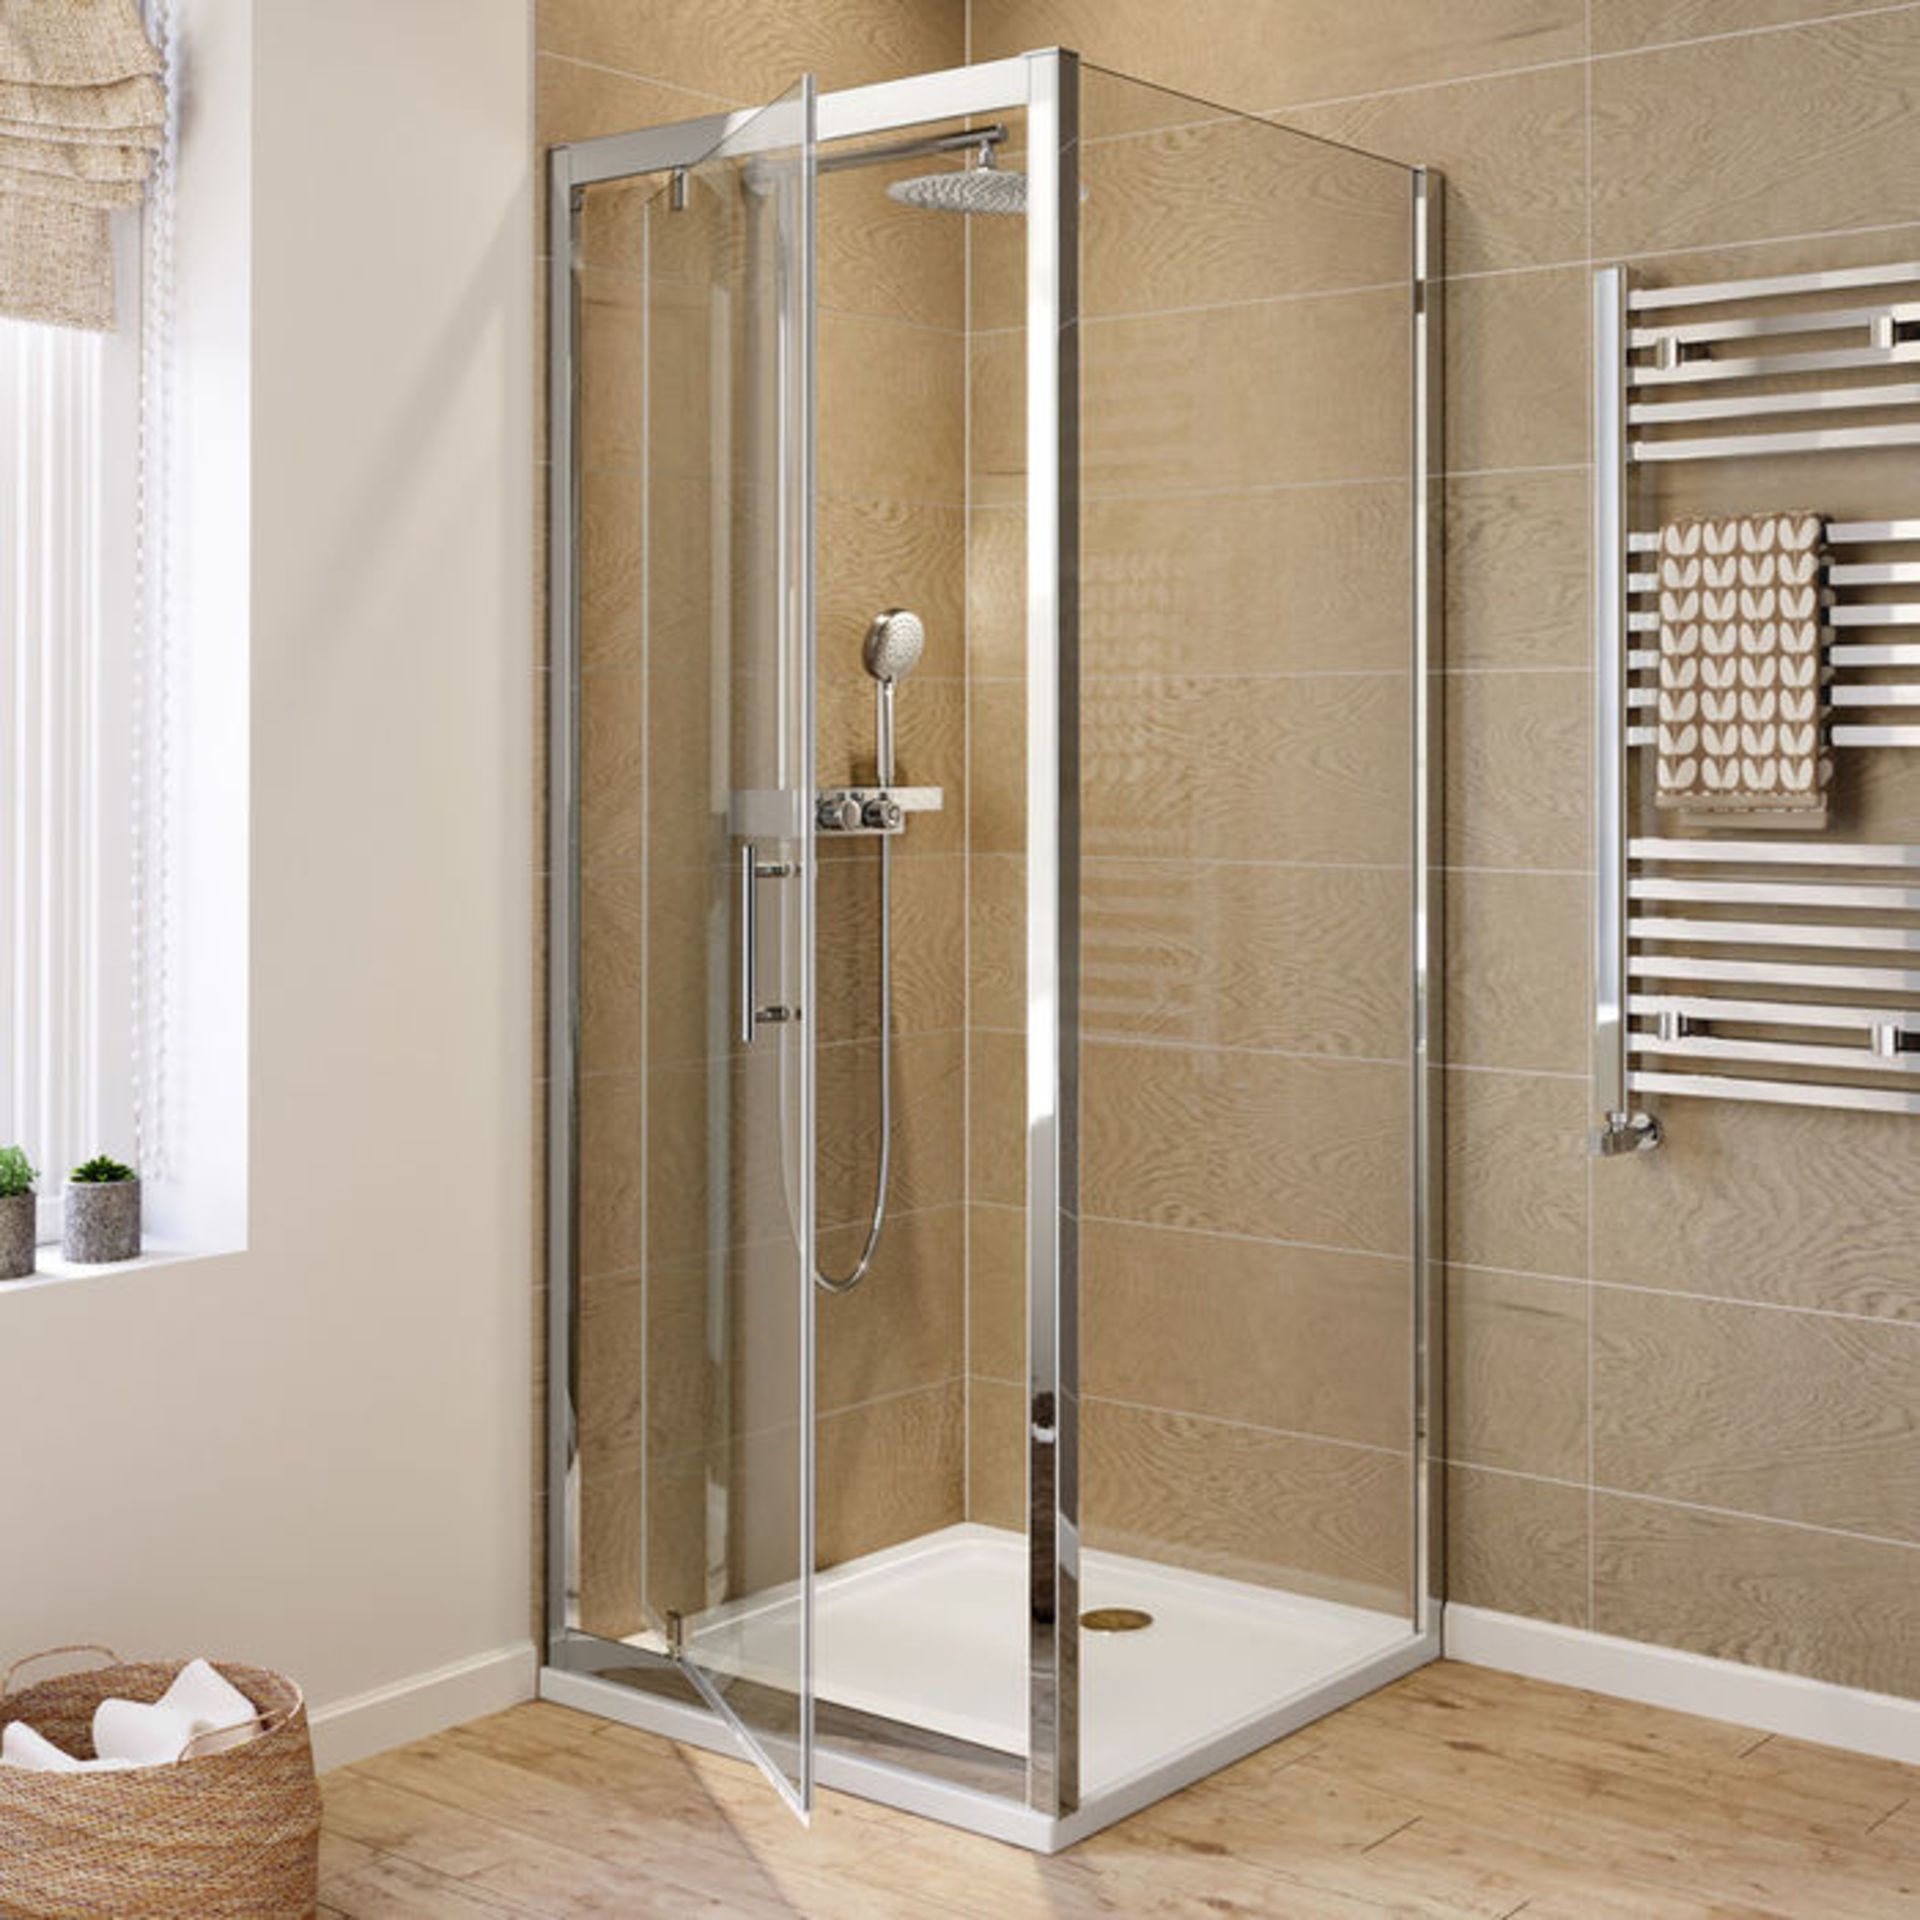 NEW Twyfords 760x760mm - 6mm - Elements Pivot Door Shower Enclosure. RRP £309.99.6mm Safety ... - Image 2 of 3